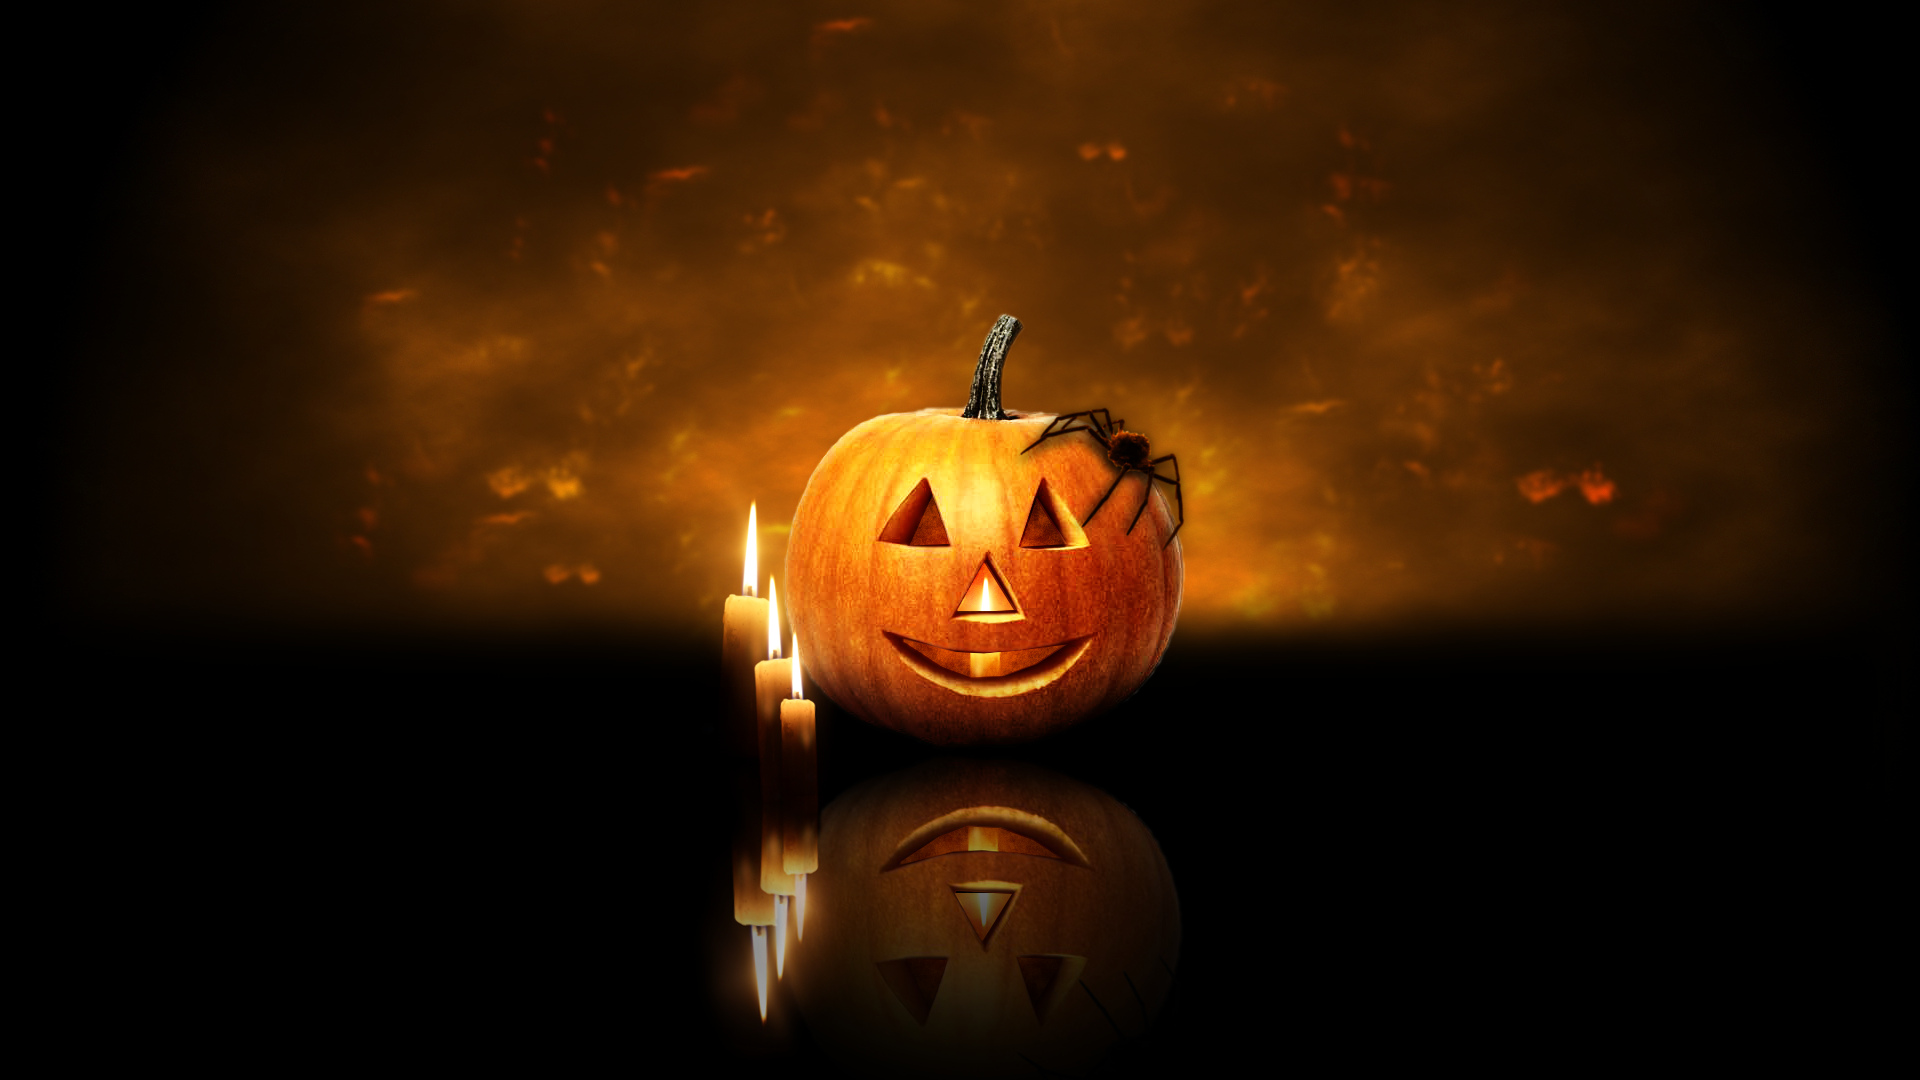 Scary Halloween 2012 HD Wallpapers Pumpkins Witches Spider Web 1920x1080